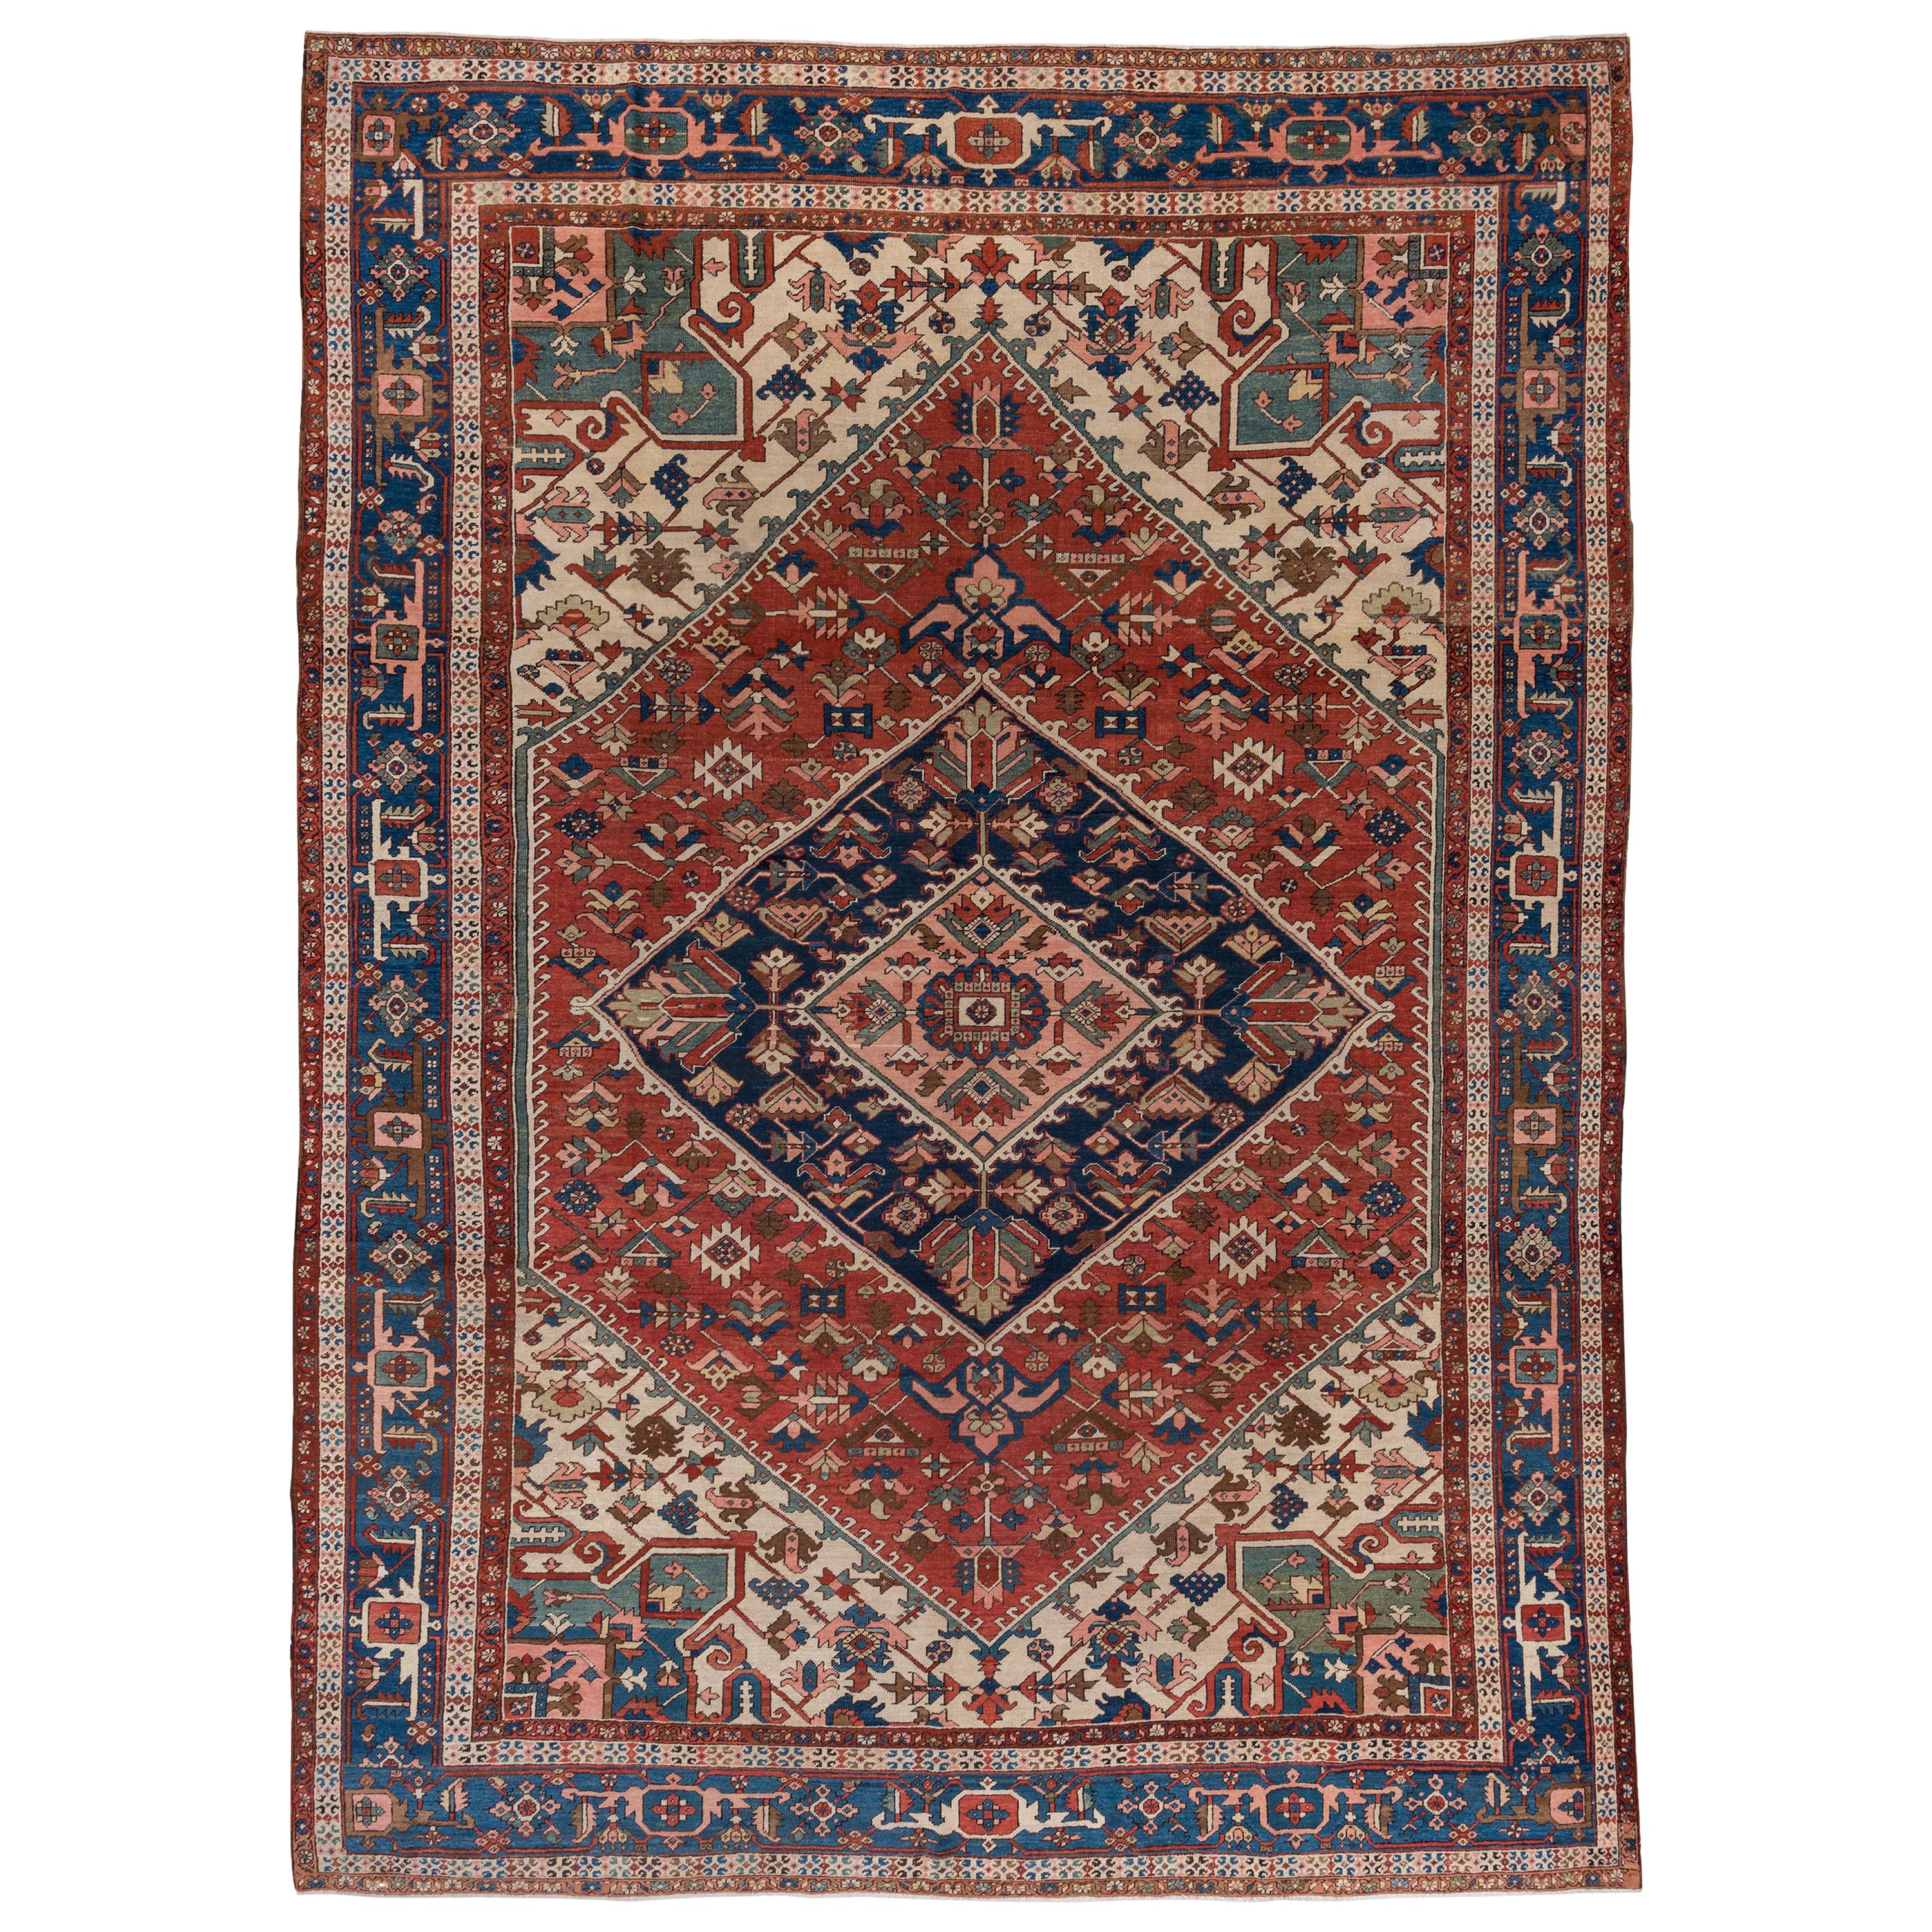 Antique Persian Serapi Rug, Rust Field, Blue Borders, Pink and Green Accents